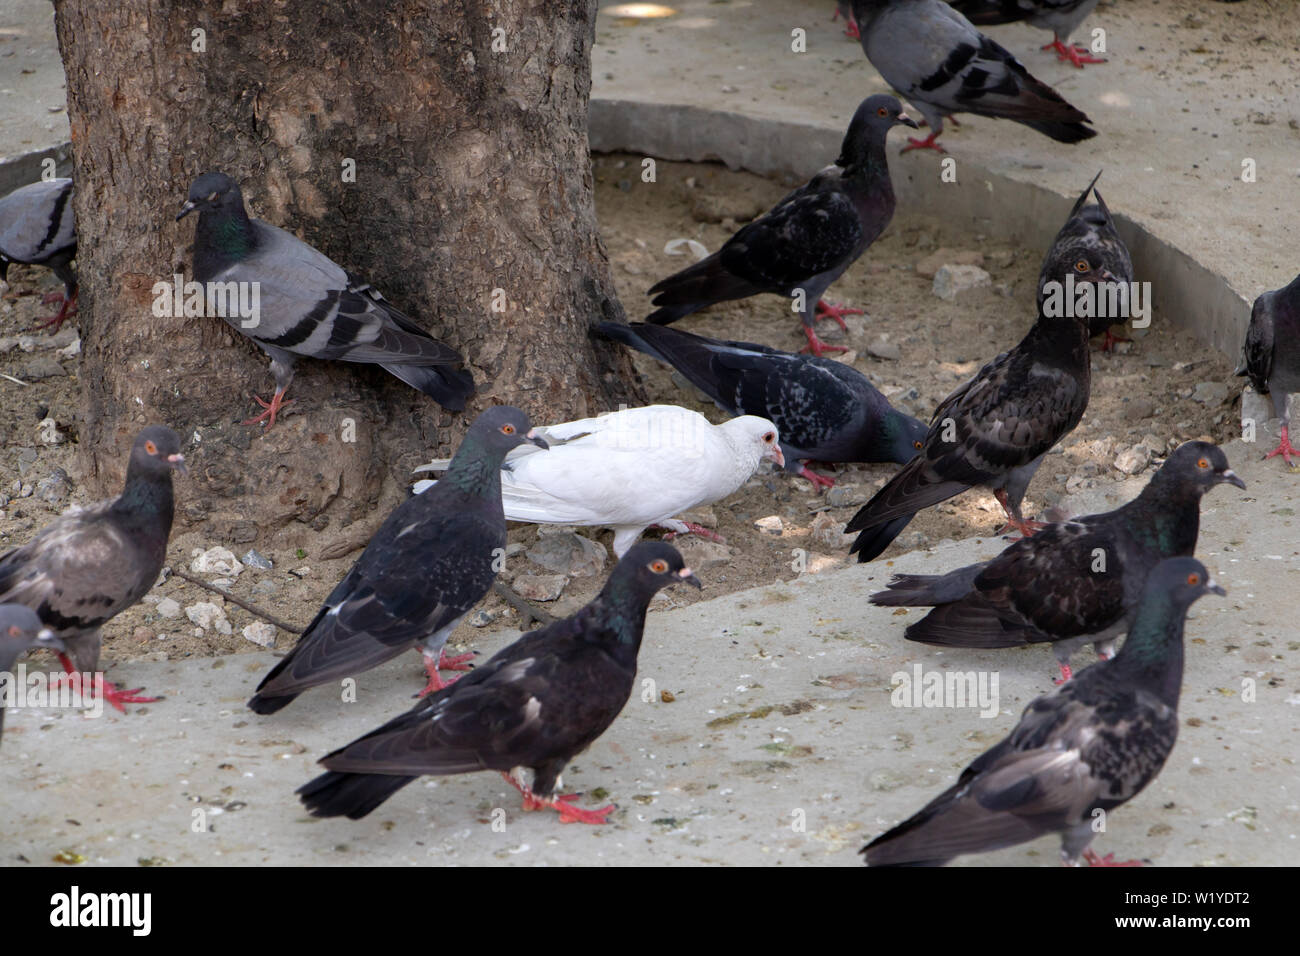 A white pigeon walks on the street between the dark pigeons. The only white dove among the black birds. Stock Photo